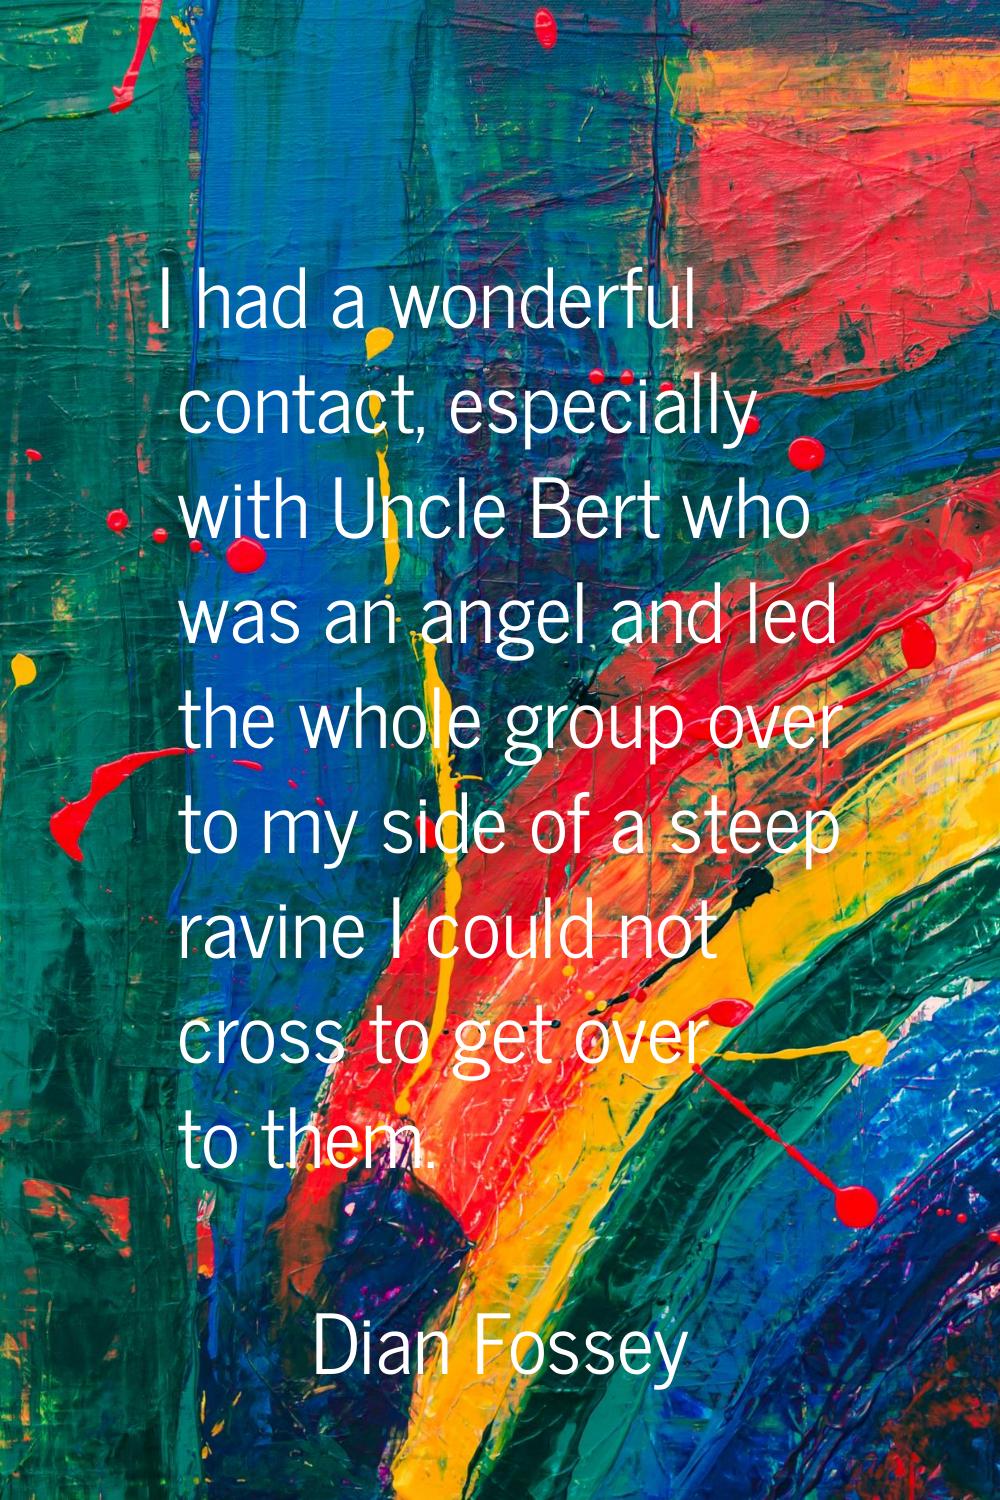 I had a wonderful contact, especially with Uncle Bert who was an angel and led the whole group over